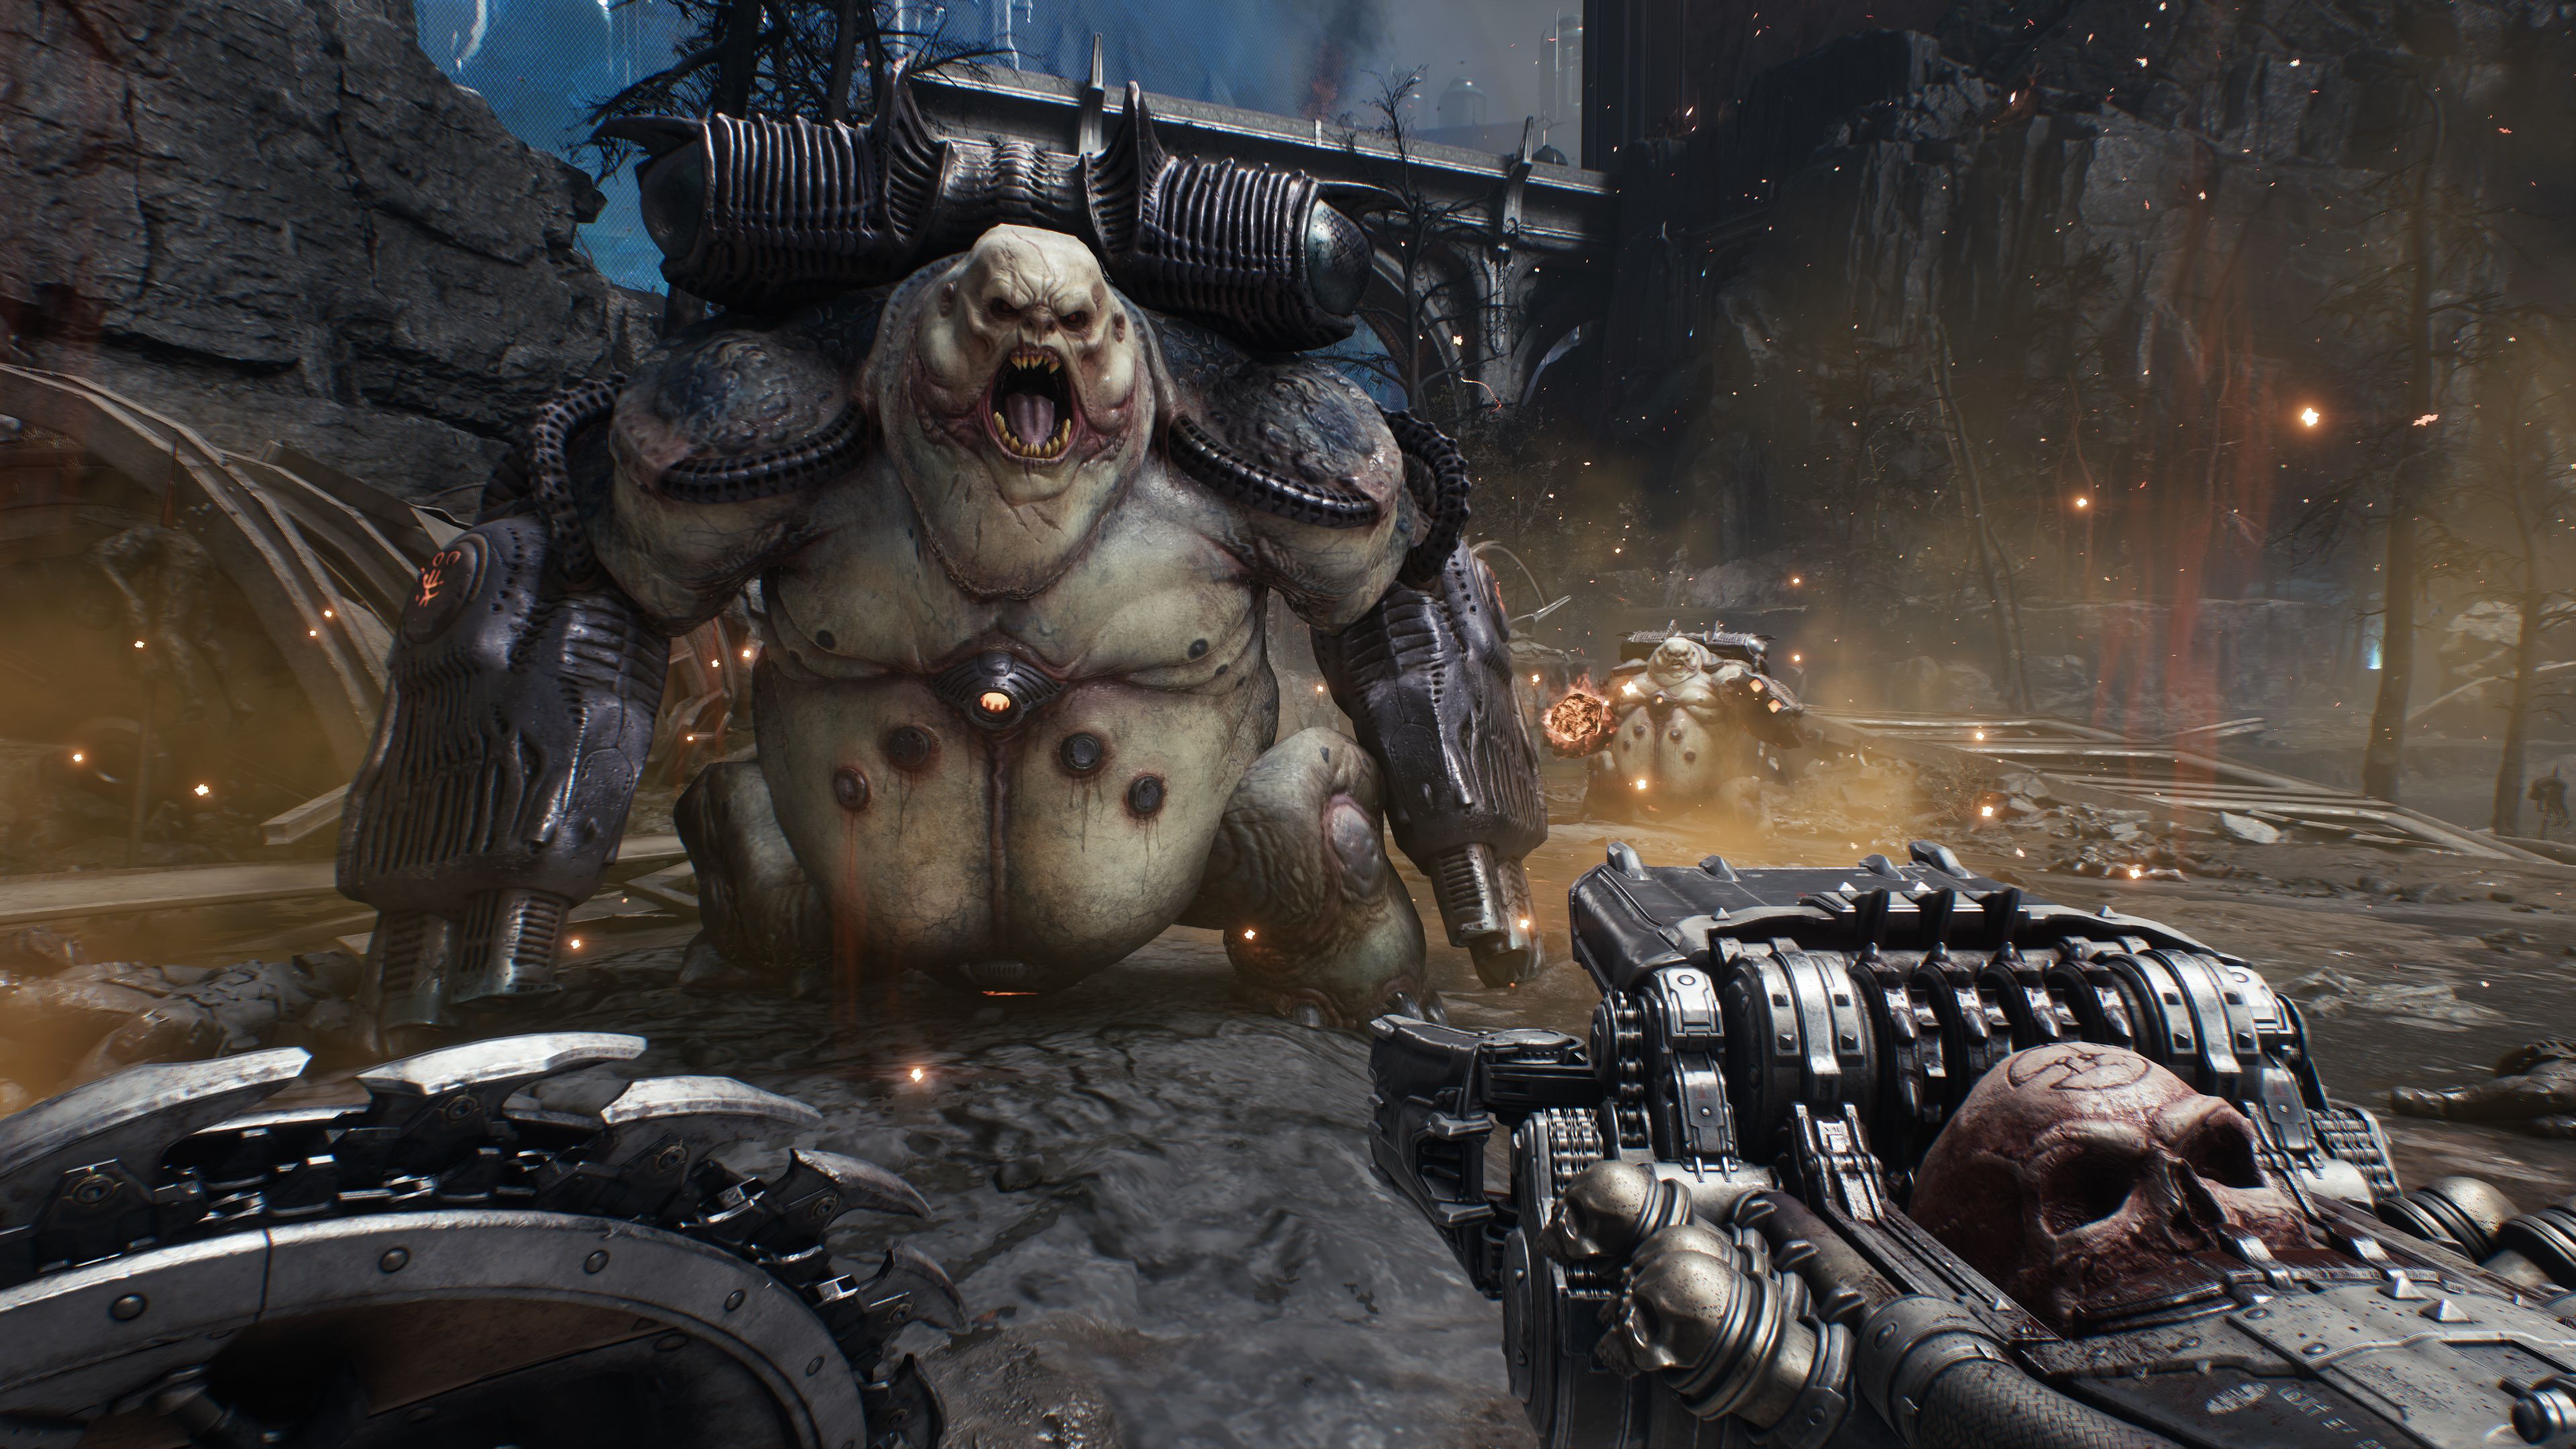 The player faces against a pairs of gargantuan demons.